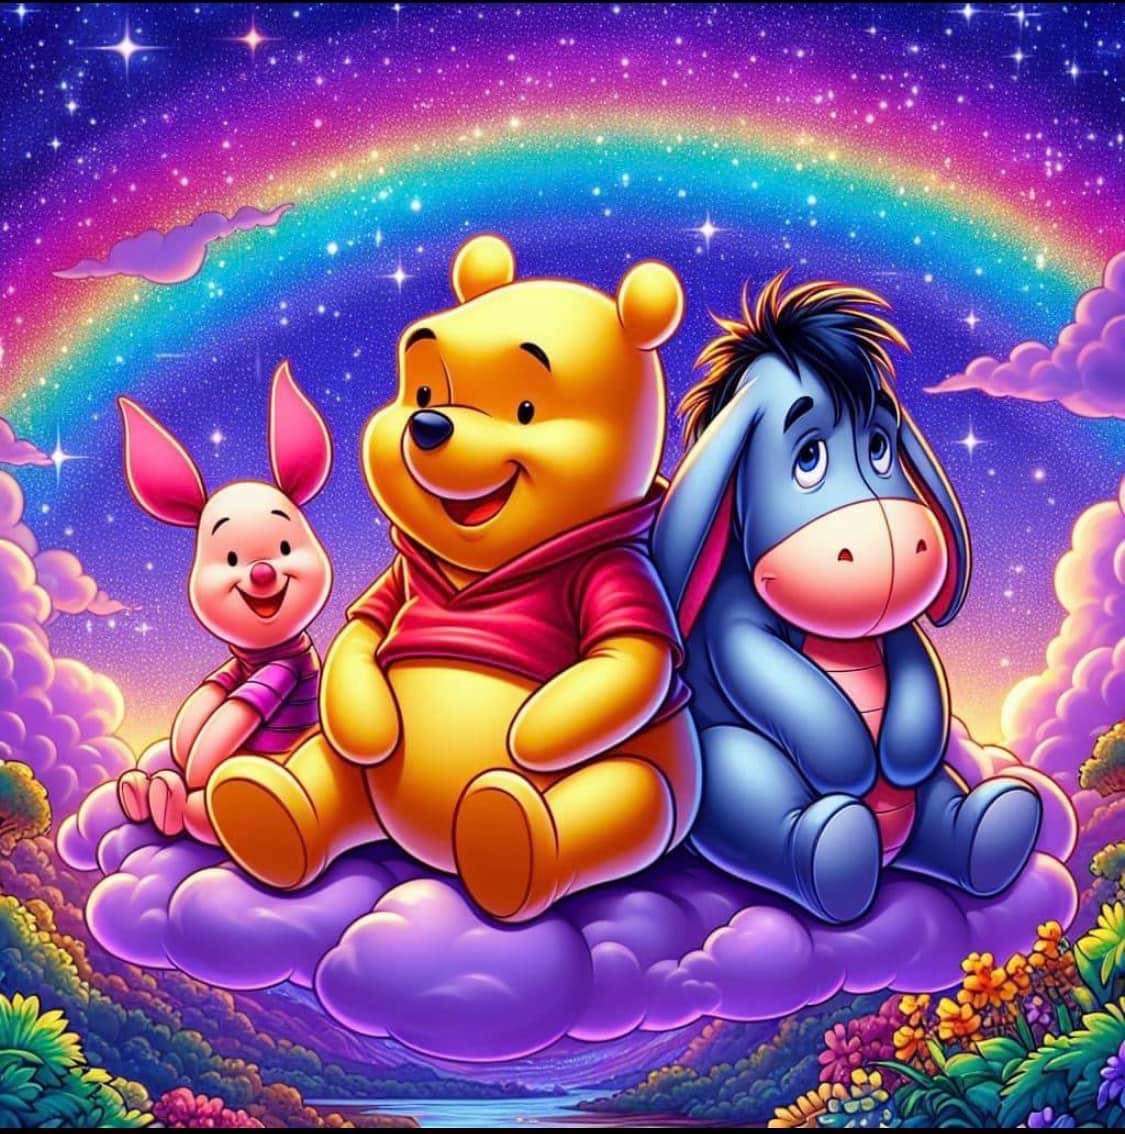 Winnie the Pooh and Friends jigsaw puzzle online